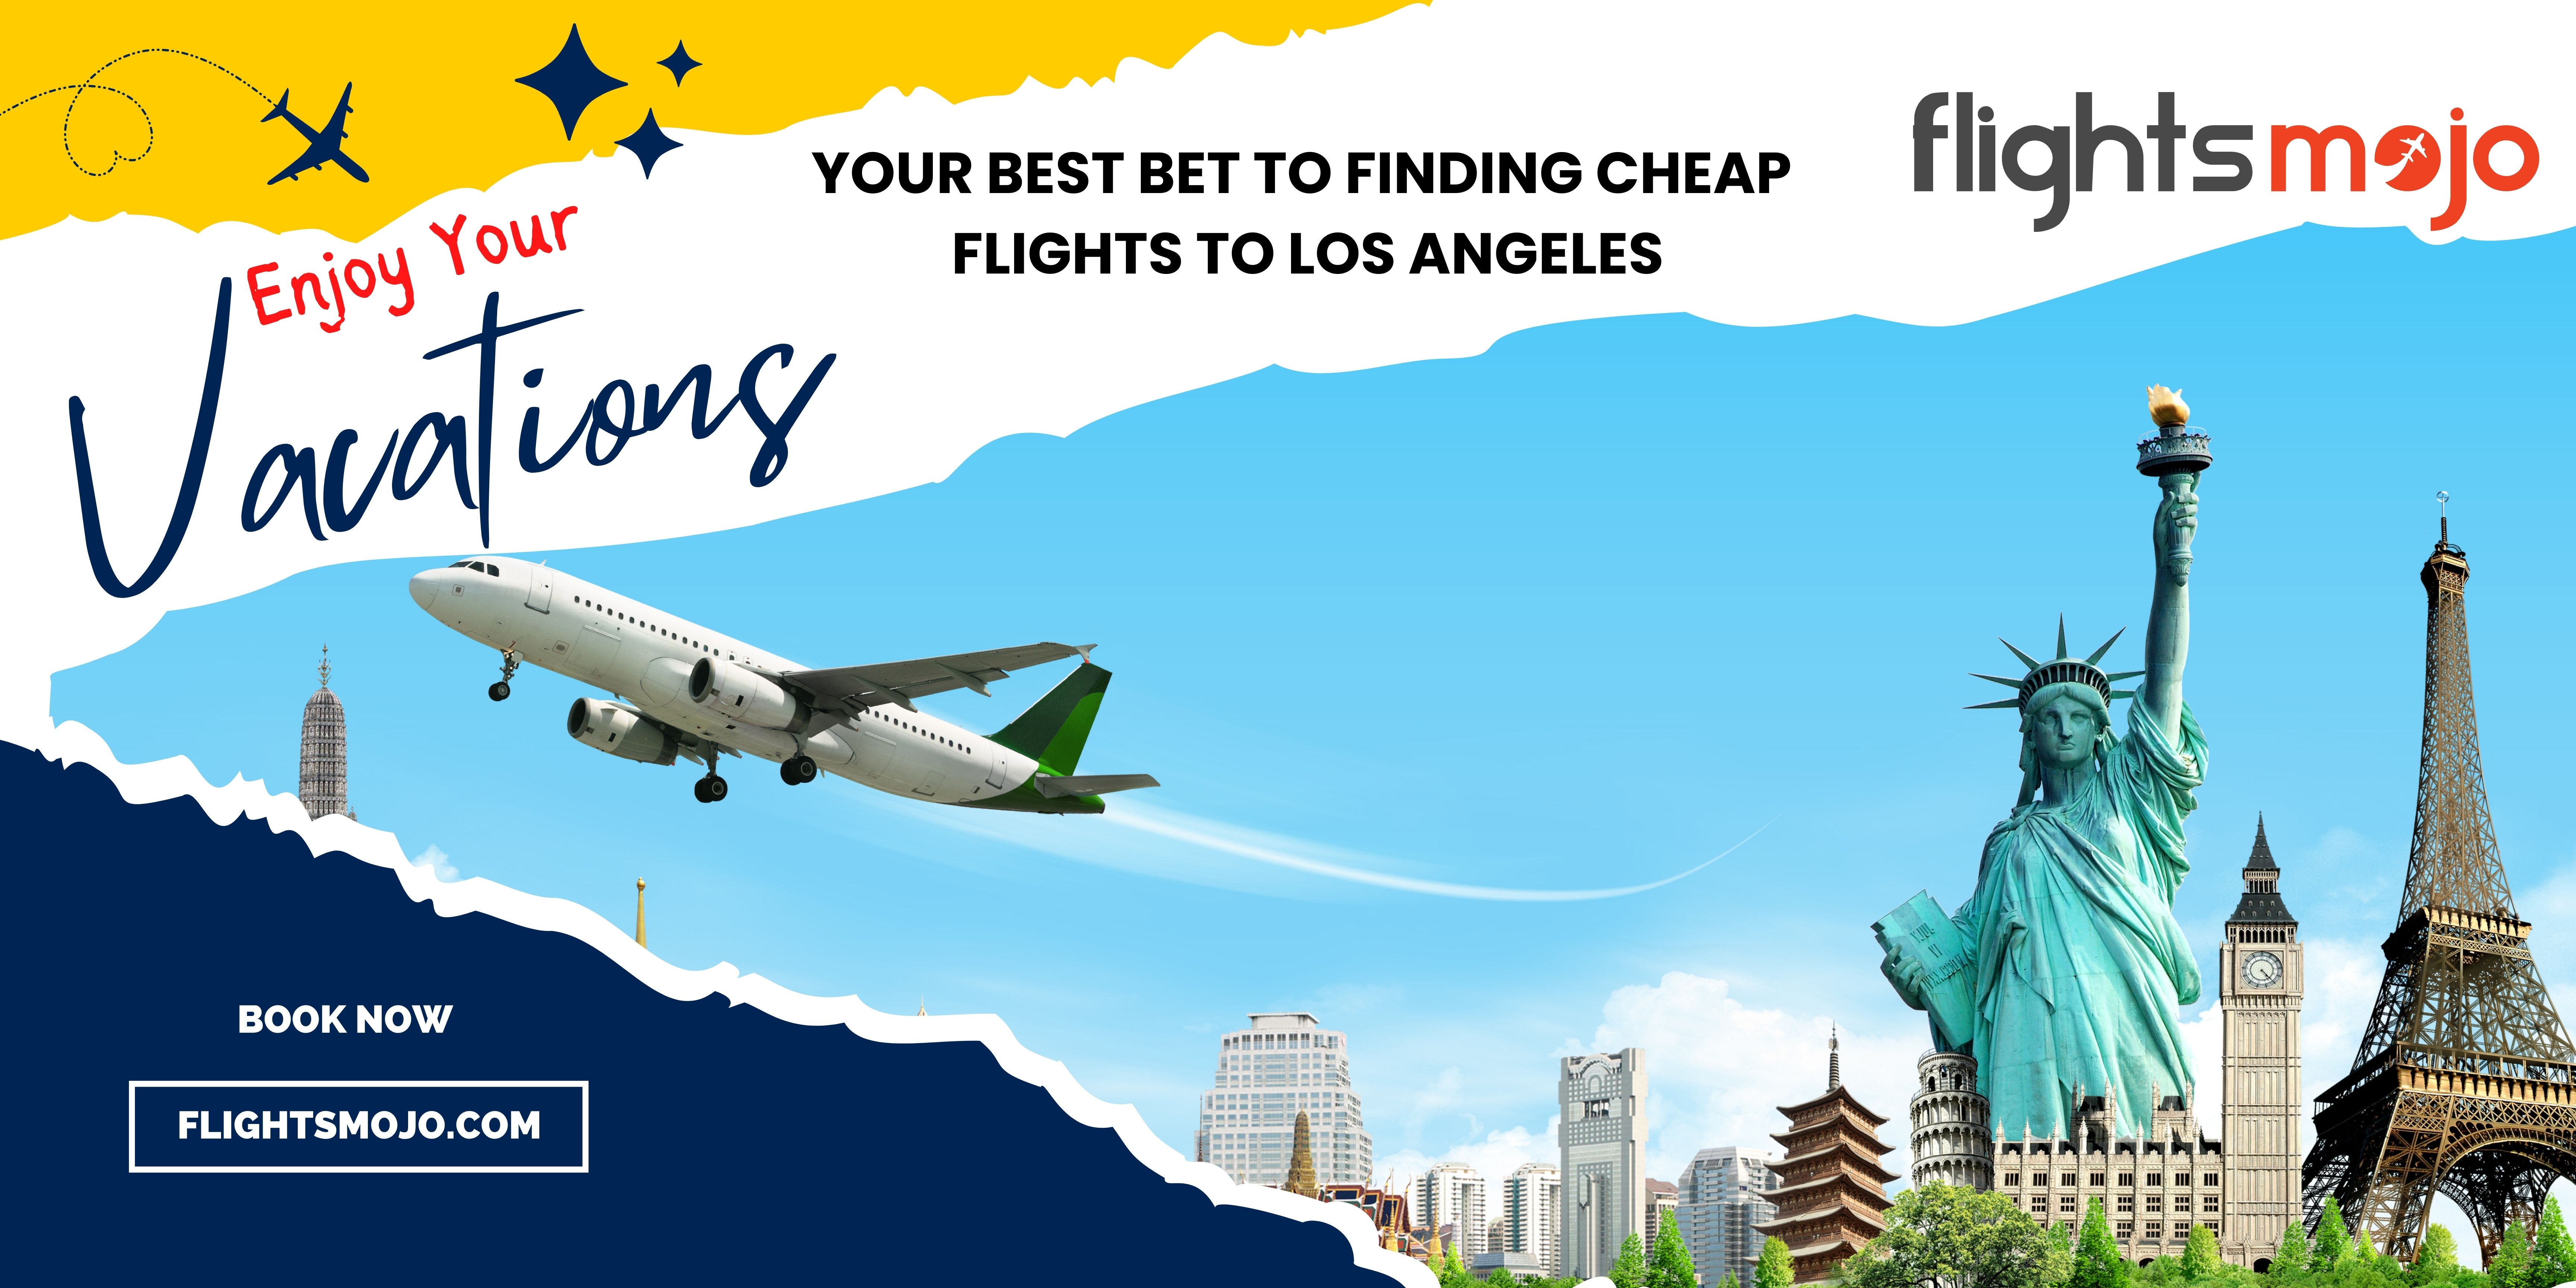 Your Best Bet to Finding Cheap Flights to Los Angeles – Get Last Minute Flights Tickets at low Price